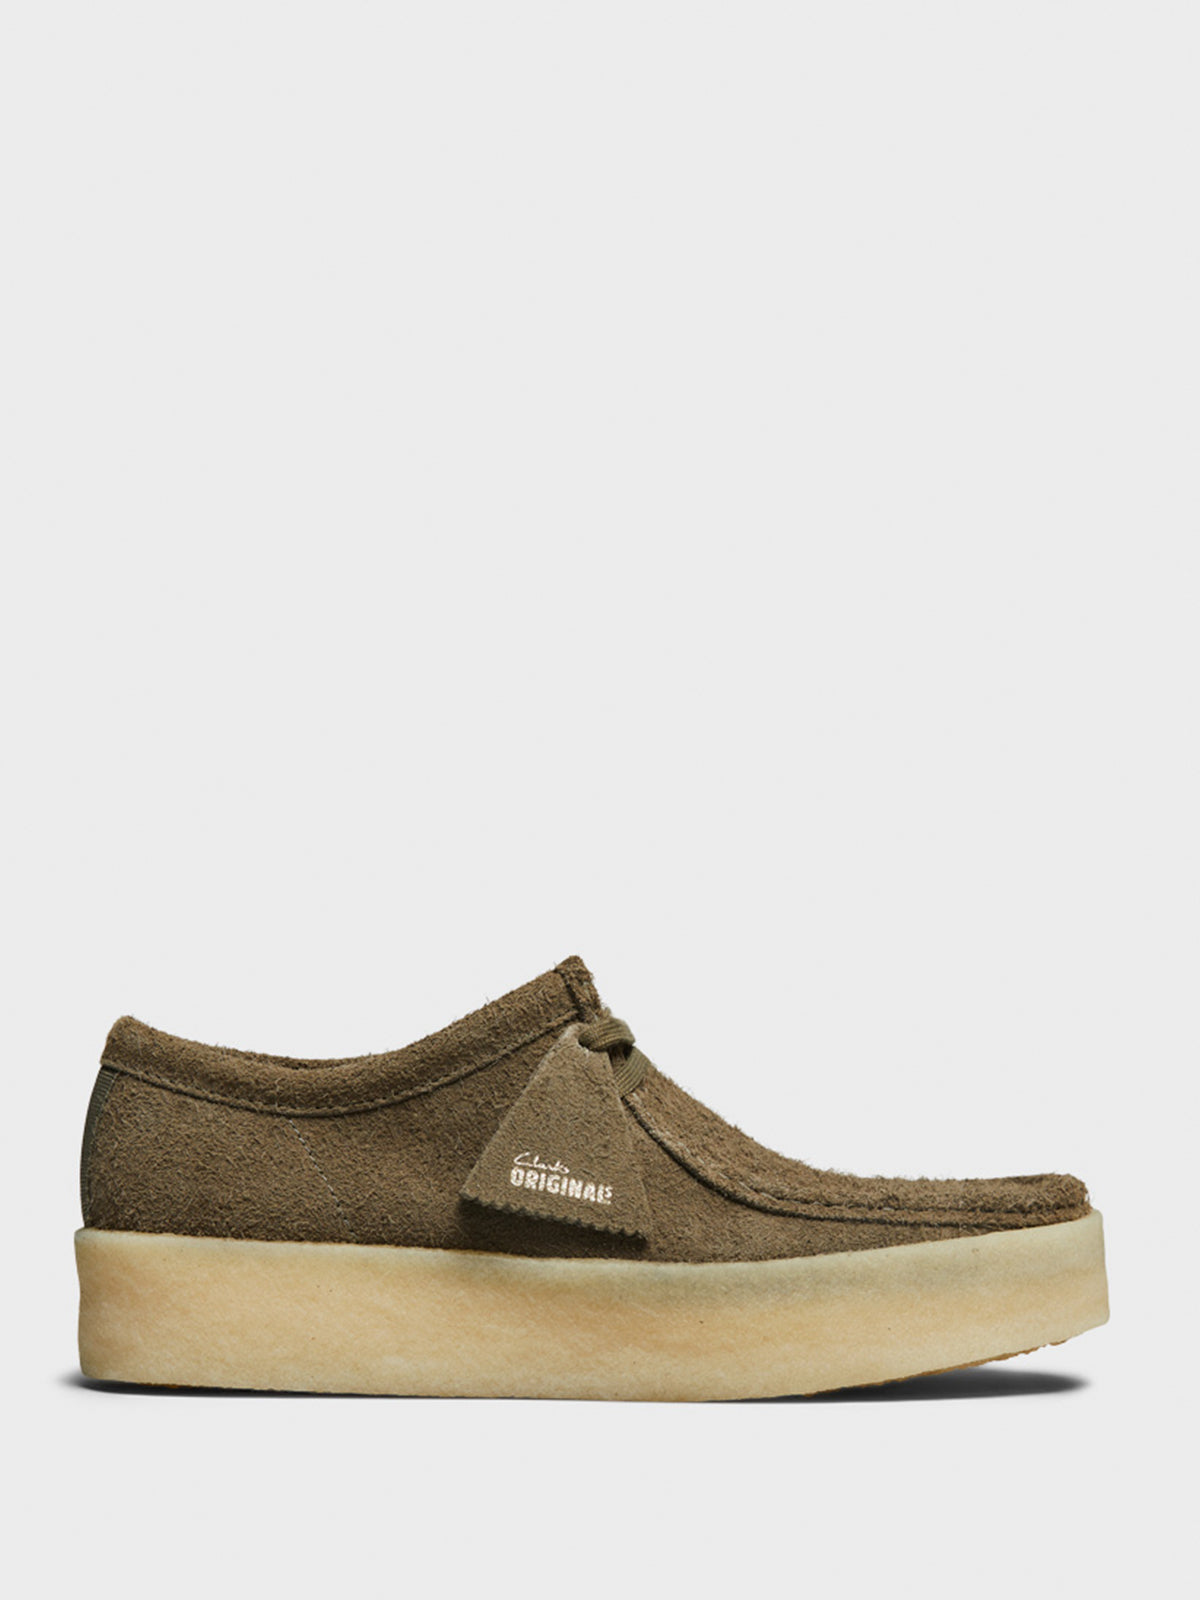 Clarks - Wallabee Cup Shoes in Pale Khaki Suede